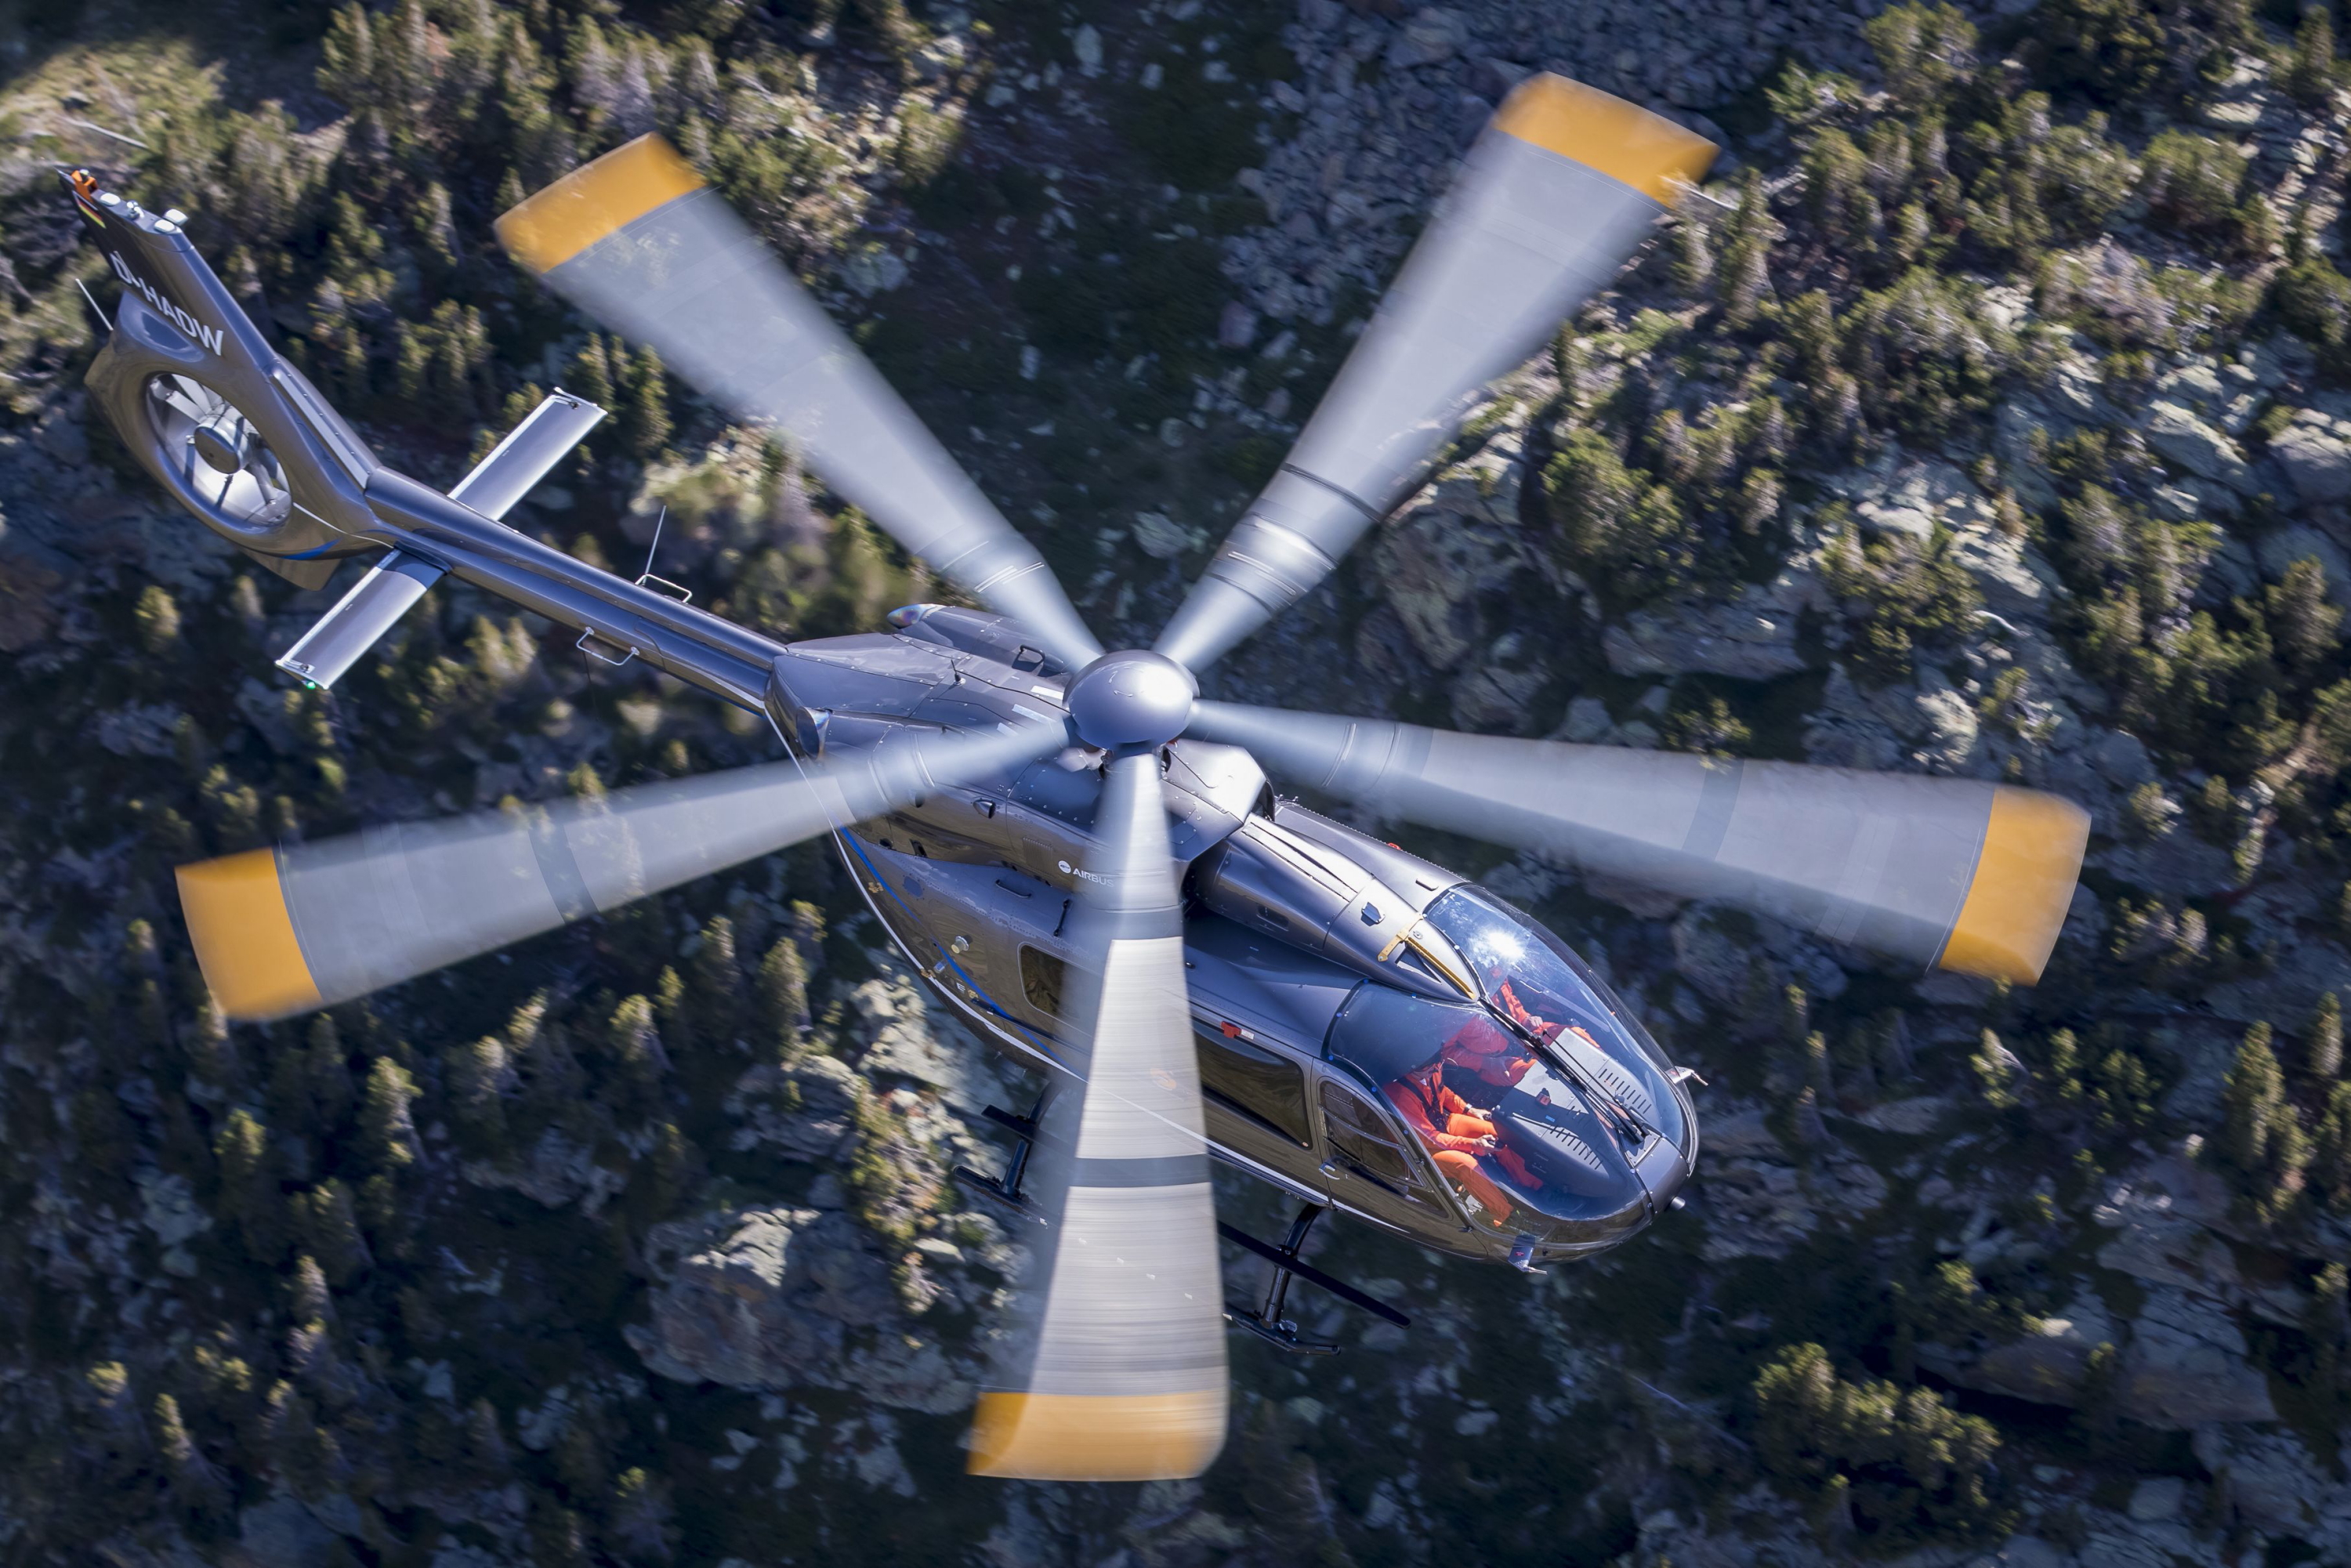 Airbus Helicopters is unveiling a new version of its H145 light twin-engine helicopter at Heli-Expo 2019 in Atlanta this week. Visible on the Airbus booth at the show, this latest upgrade brings a new five-bladed rotor to the multi-mission H145, increasing the useful load of the helicopter by 150 kg while delivering new levels of comfort, simplicity and connectivity. Click to enlarge.